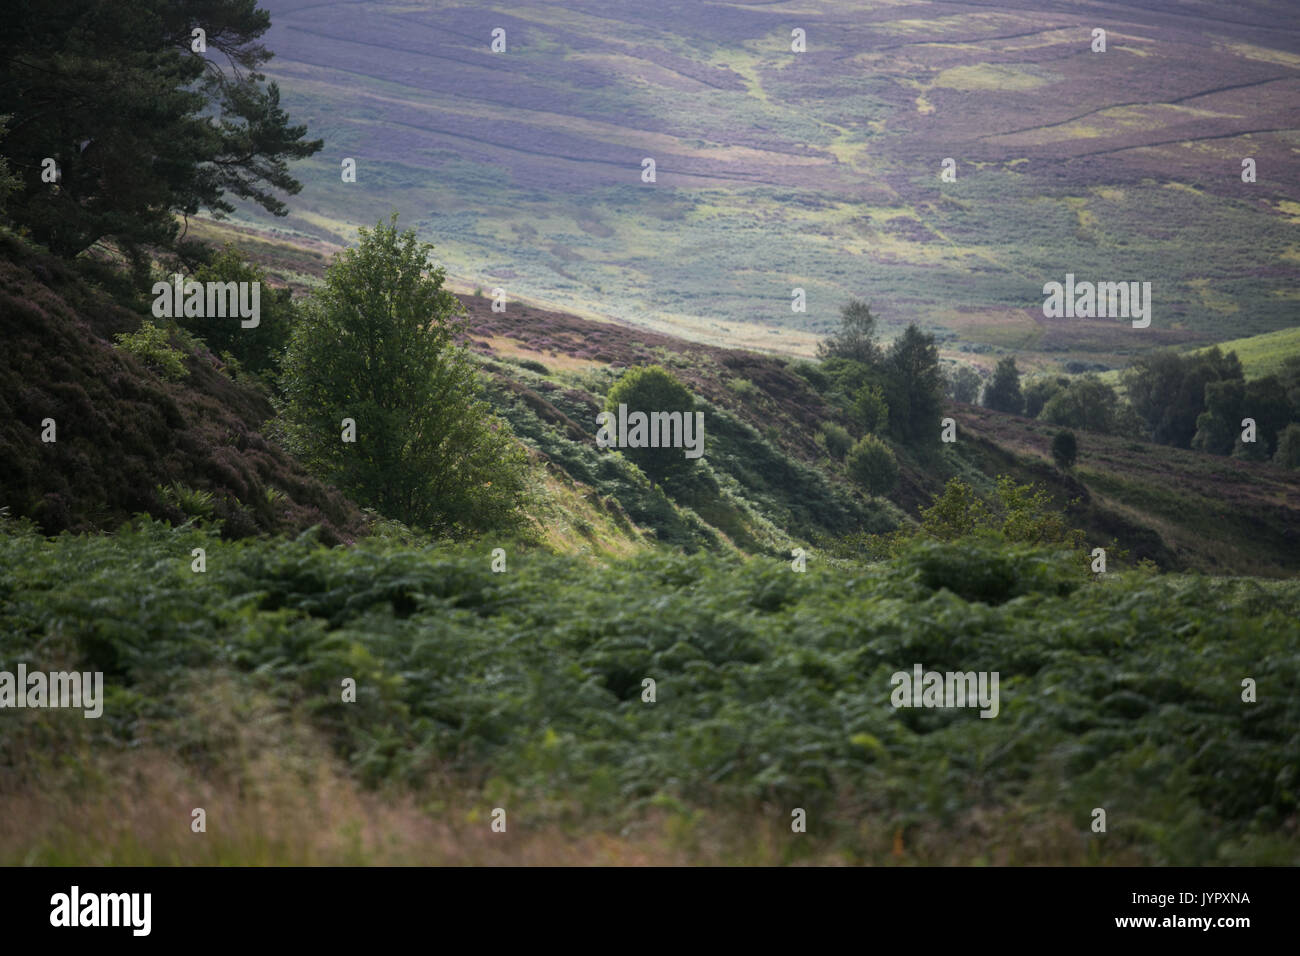 The view of moorland in the Borders of Scotland. The hills are popular hunting ground for grouse. Fern covering the ground in the summer. Stock Photo